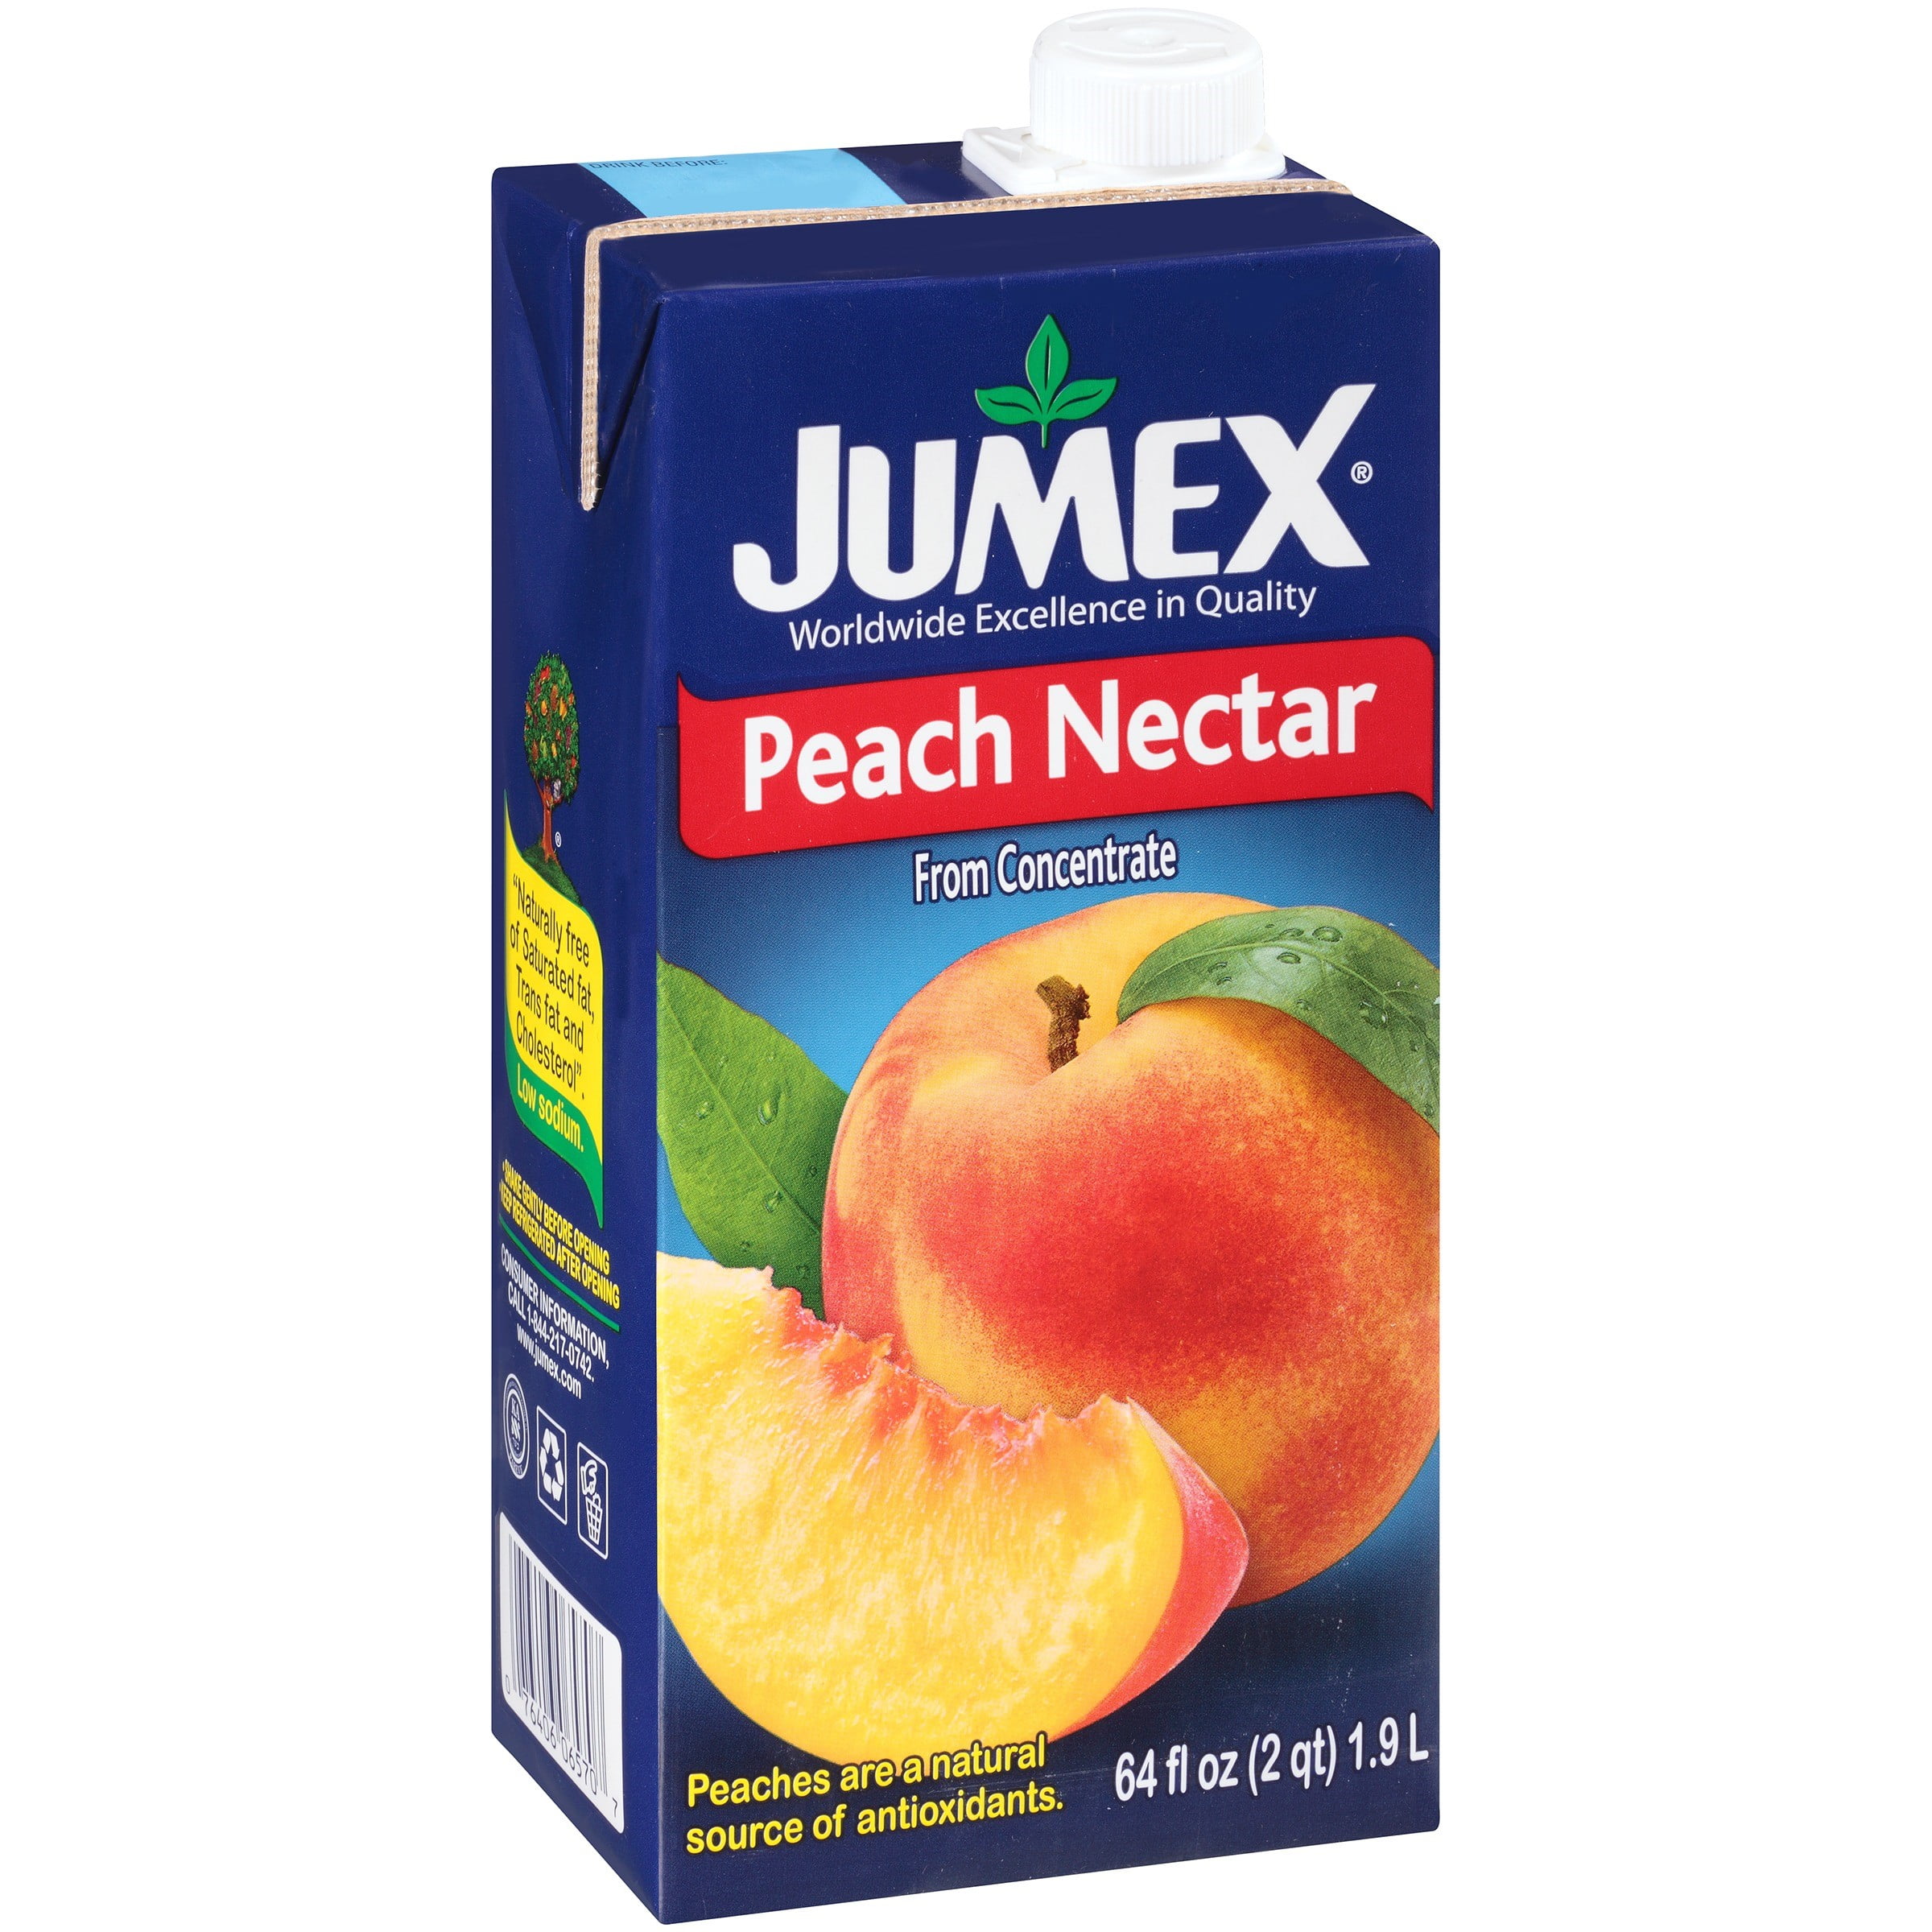 Jumex Peach Nectar from Concentrate, 64 Fl. 